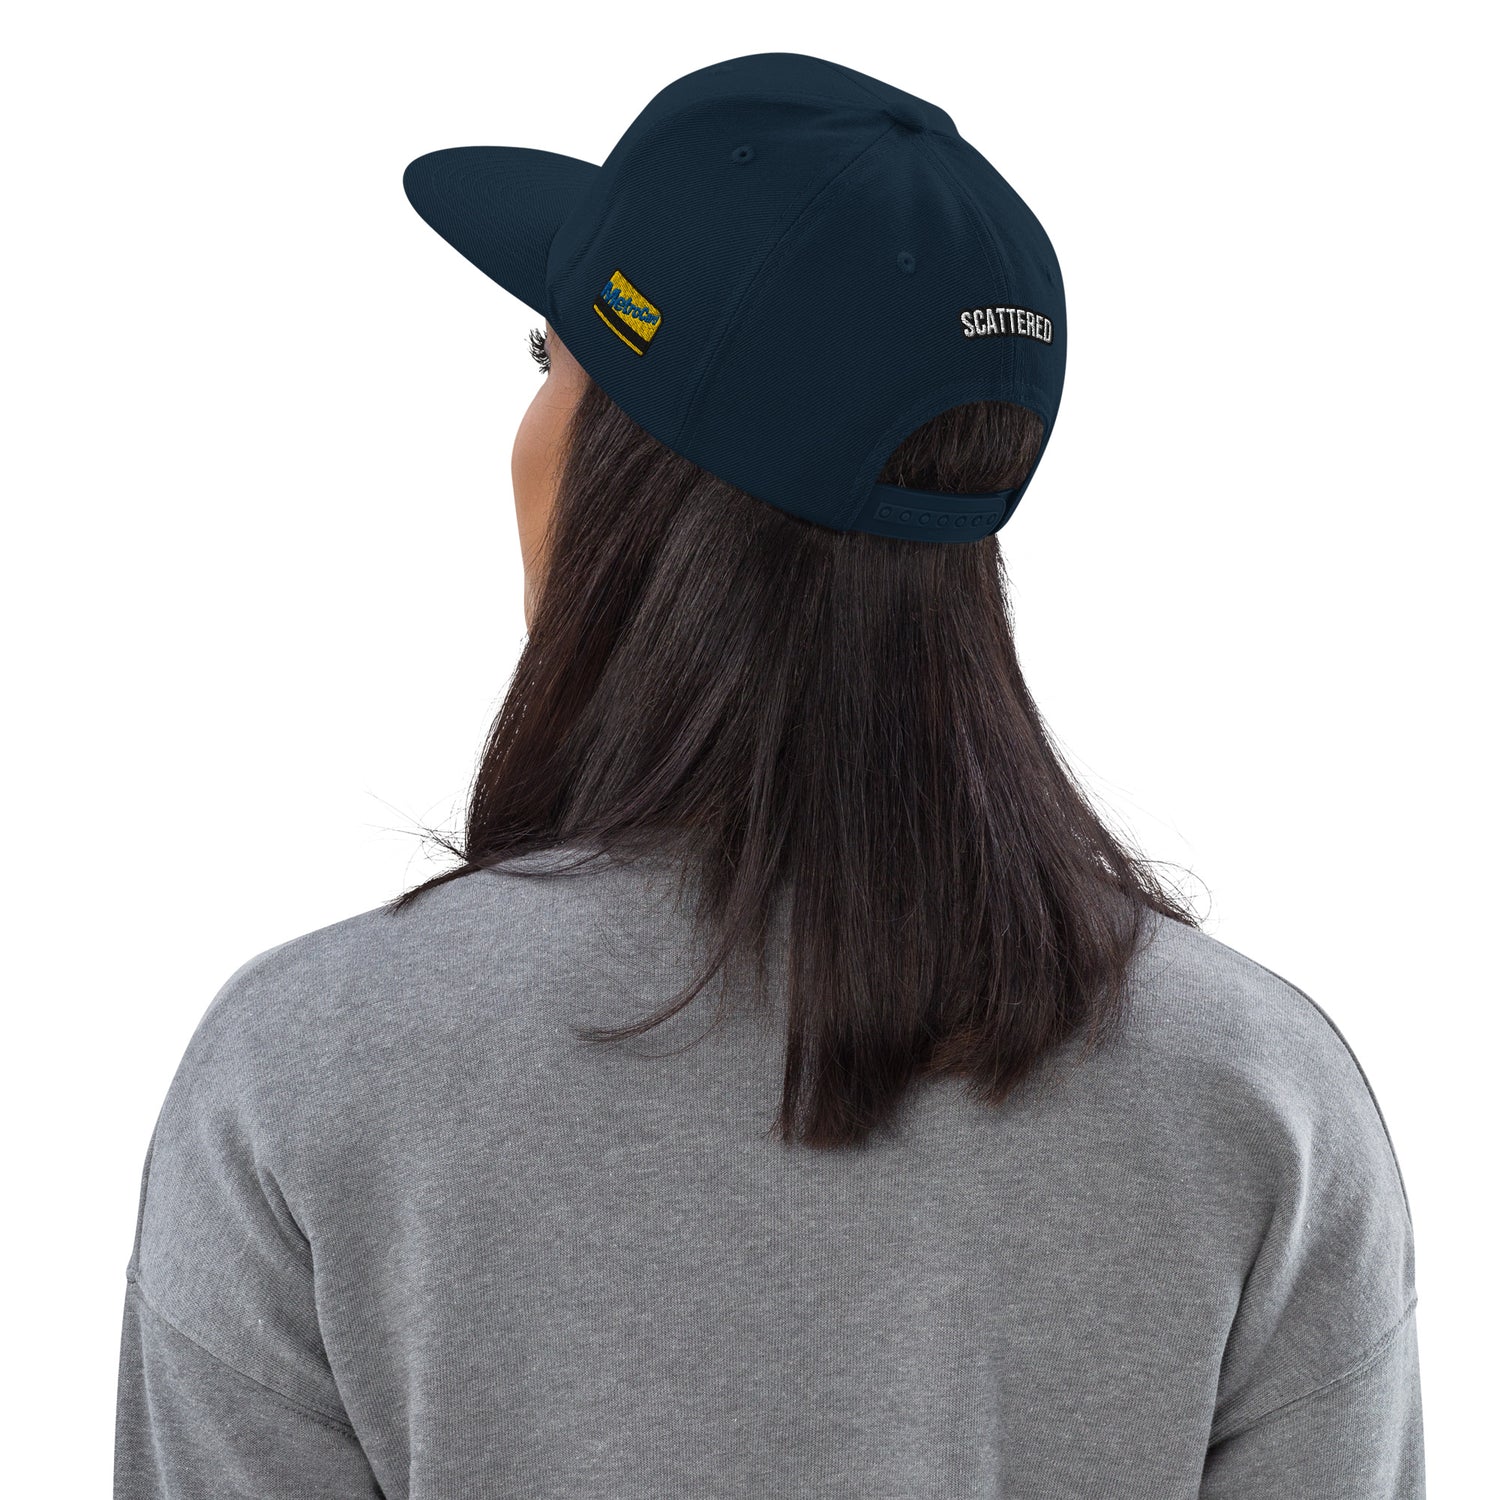 New York Apple Logo Embroidered Navy Blue Snapback Hat (Metro Card) Scattered Streetwear